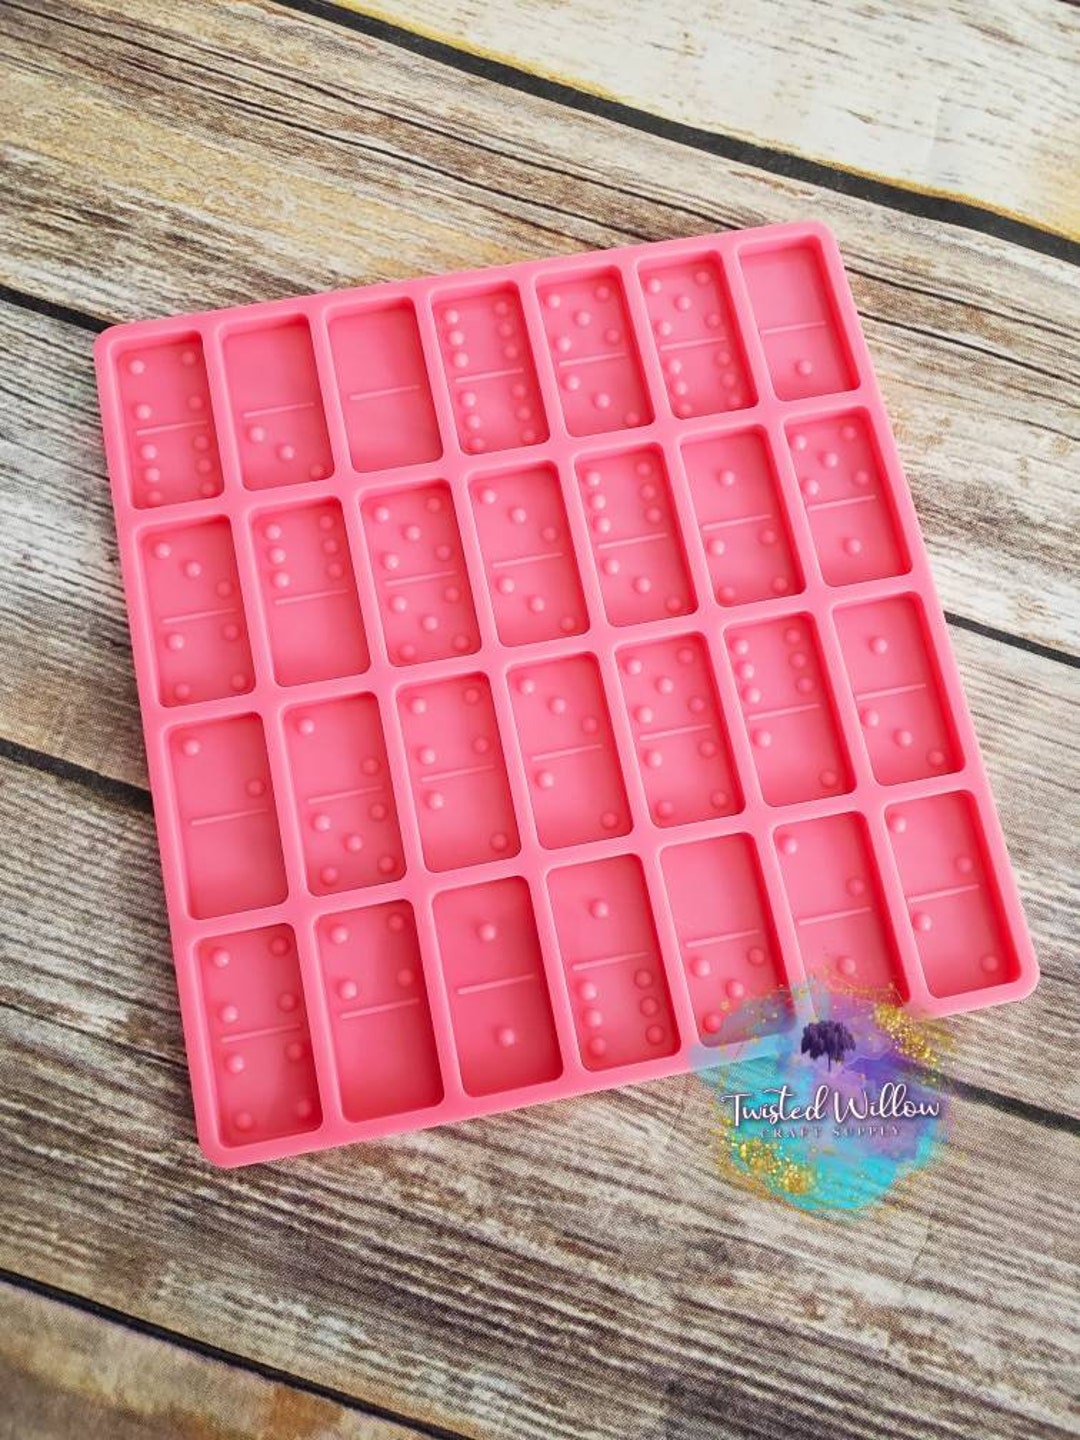 2 Styles Silicone Domino Mold-domino Resin Mold-resin Dominos Mold-diy  Silicon Mold for Resin Craft-board Game Mold 